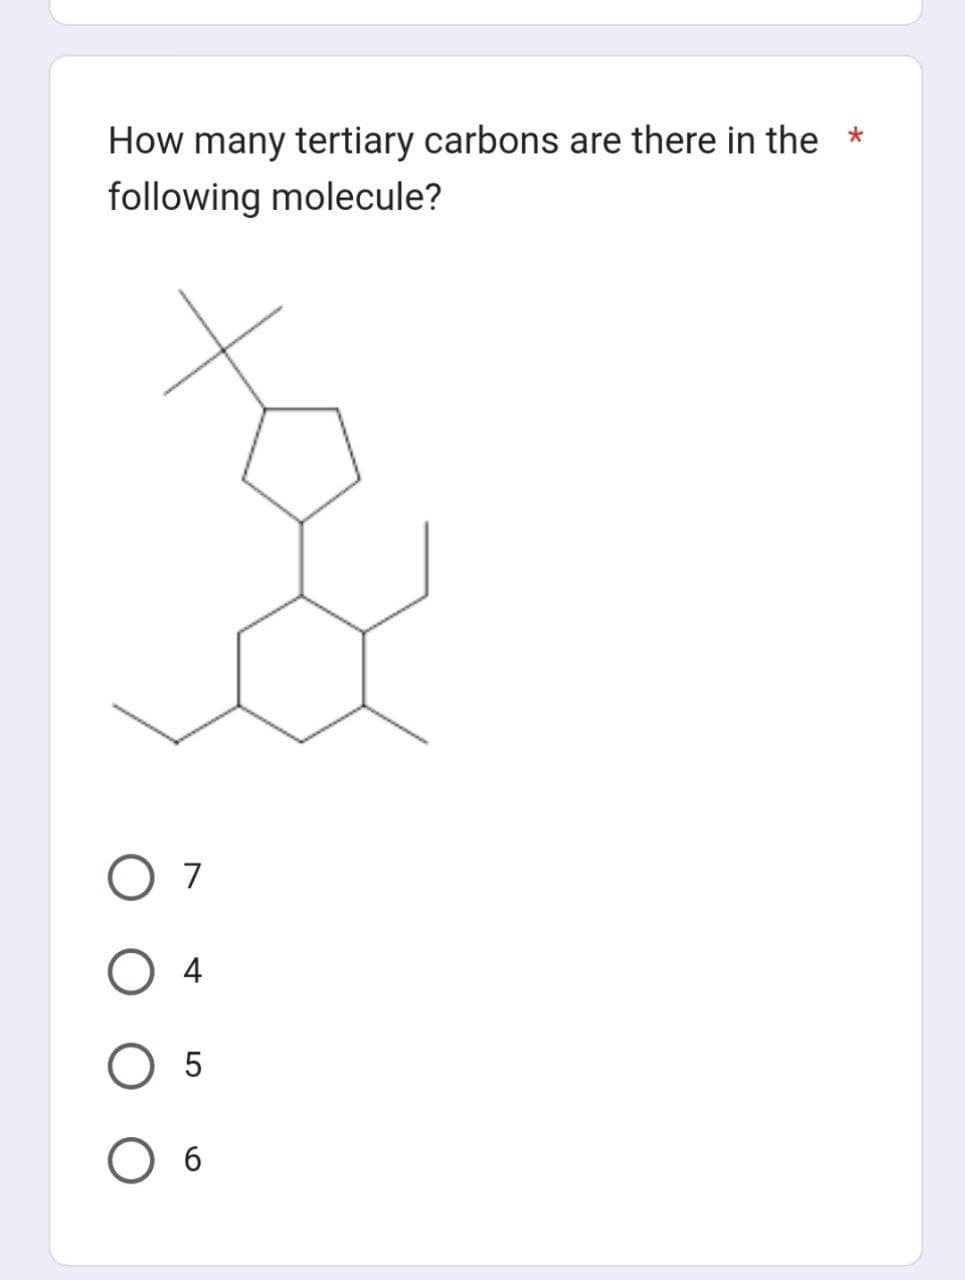 How many tertiary carbons are there in the
following molecule?
O 7
O 4
5
6
*